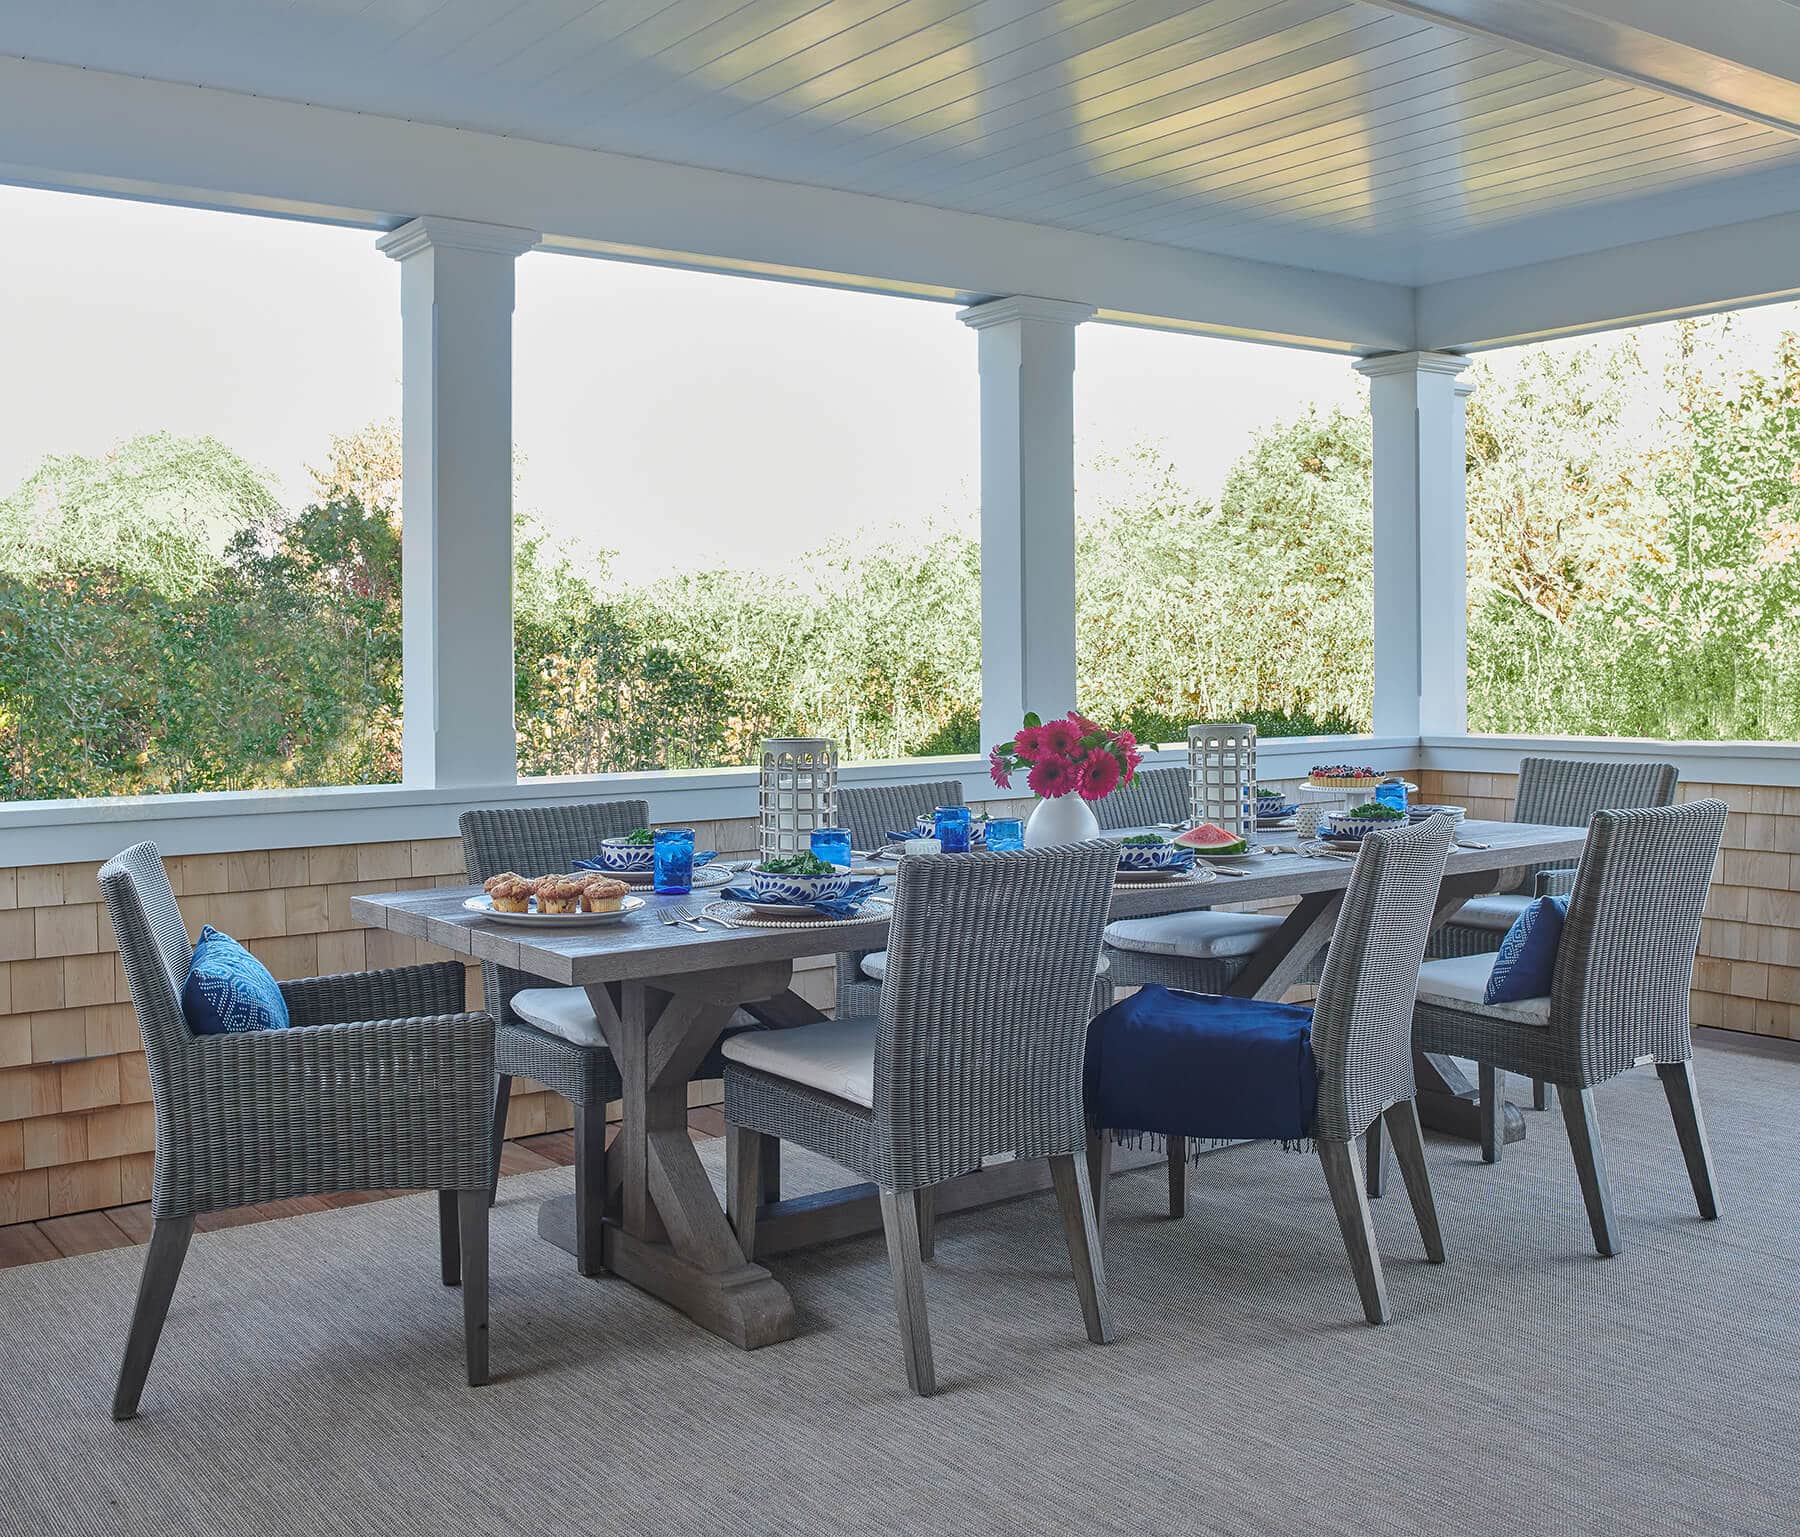 Nantucket, outdoor covered patio dining area